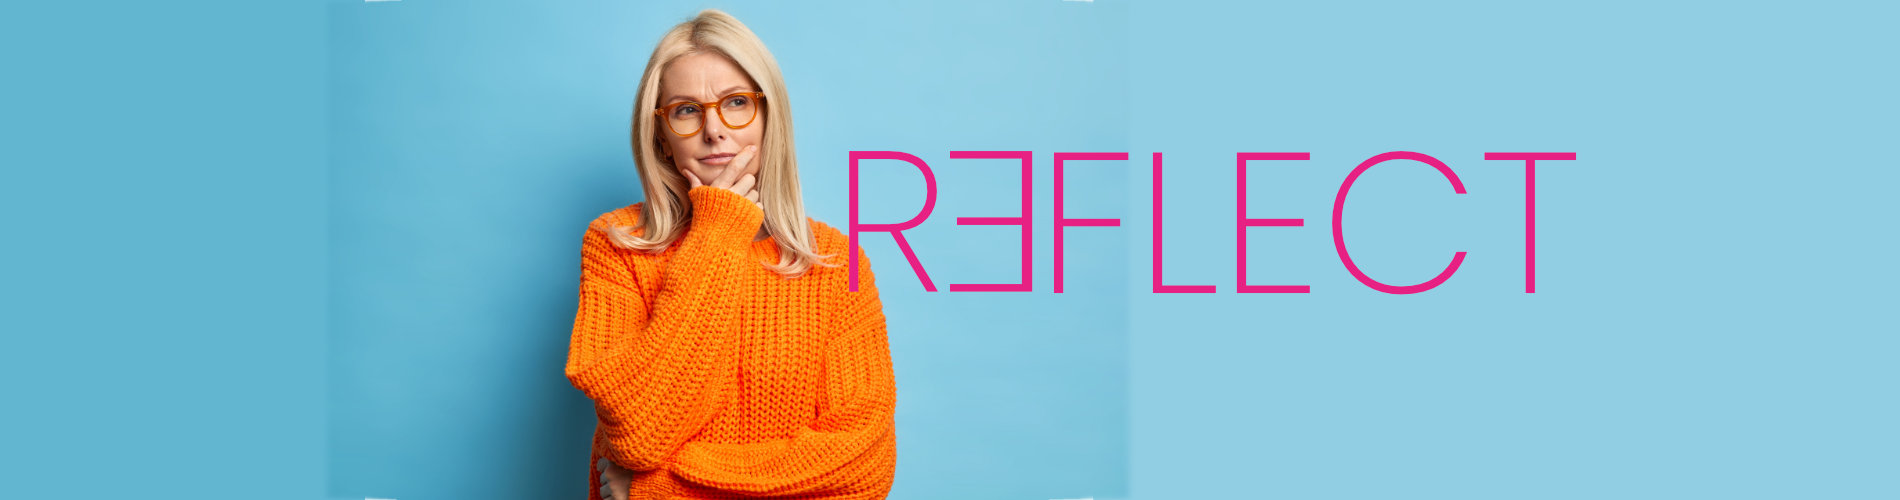 A blonde woman wearing glasses and an orange sweater doing a thinking pose resting her had on her chin